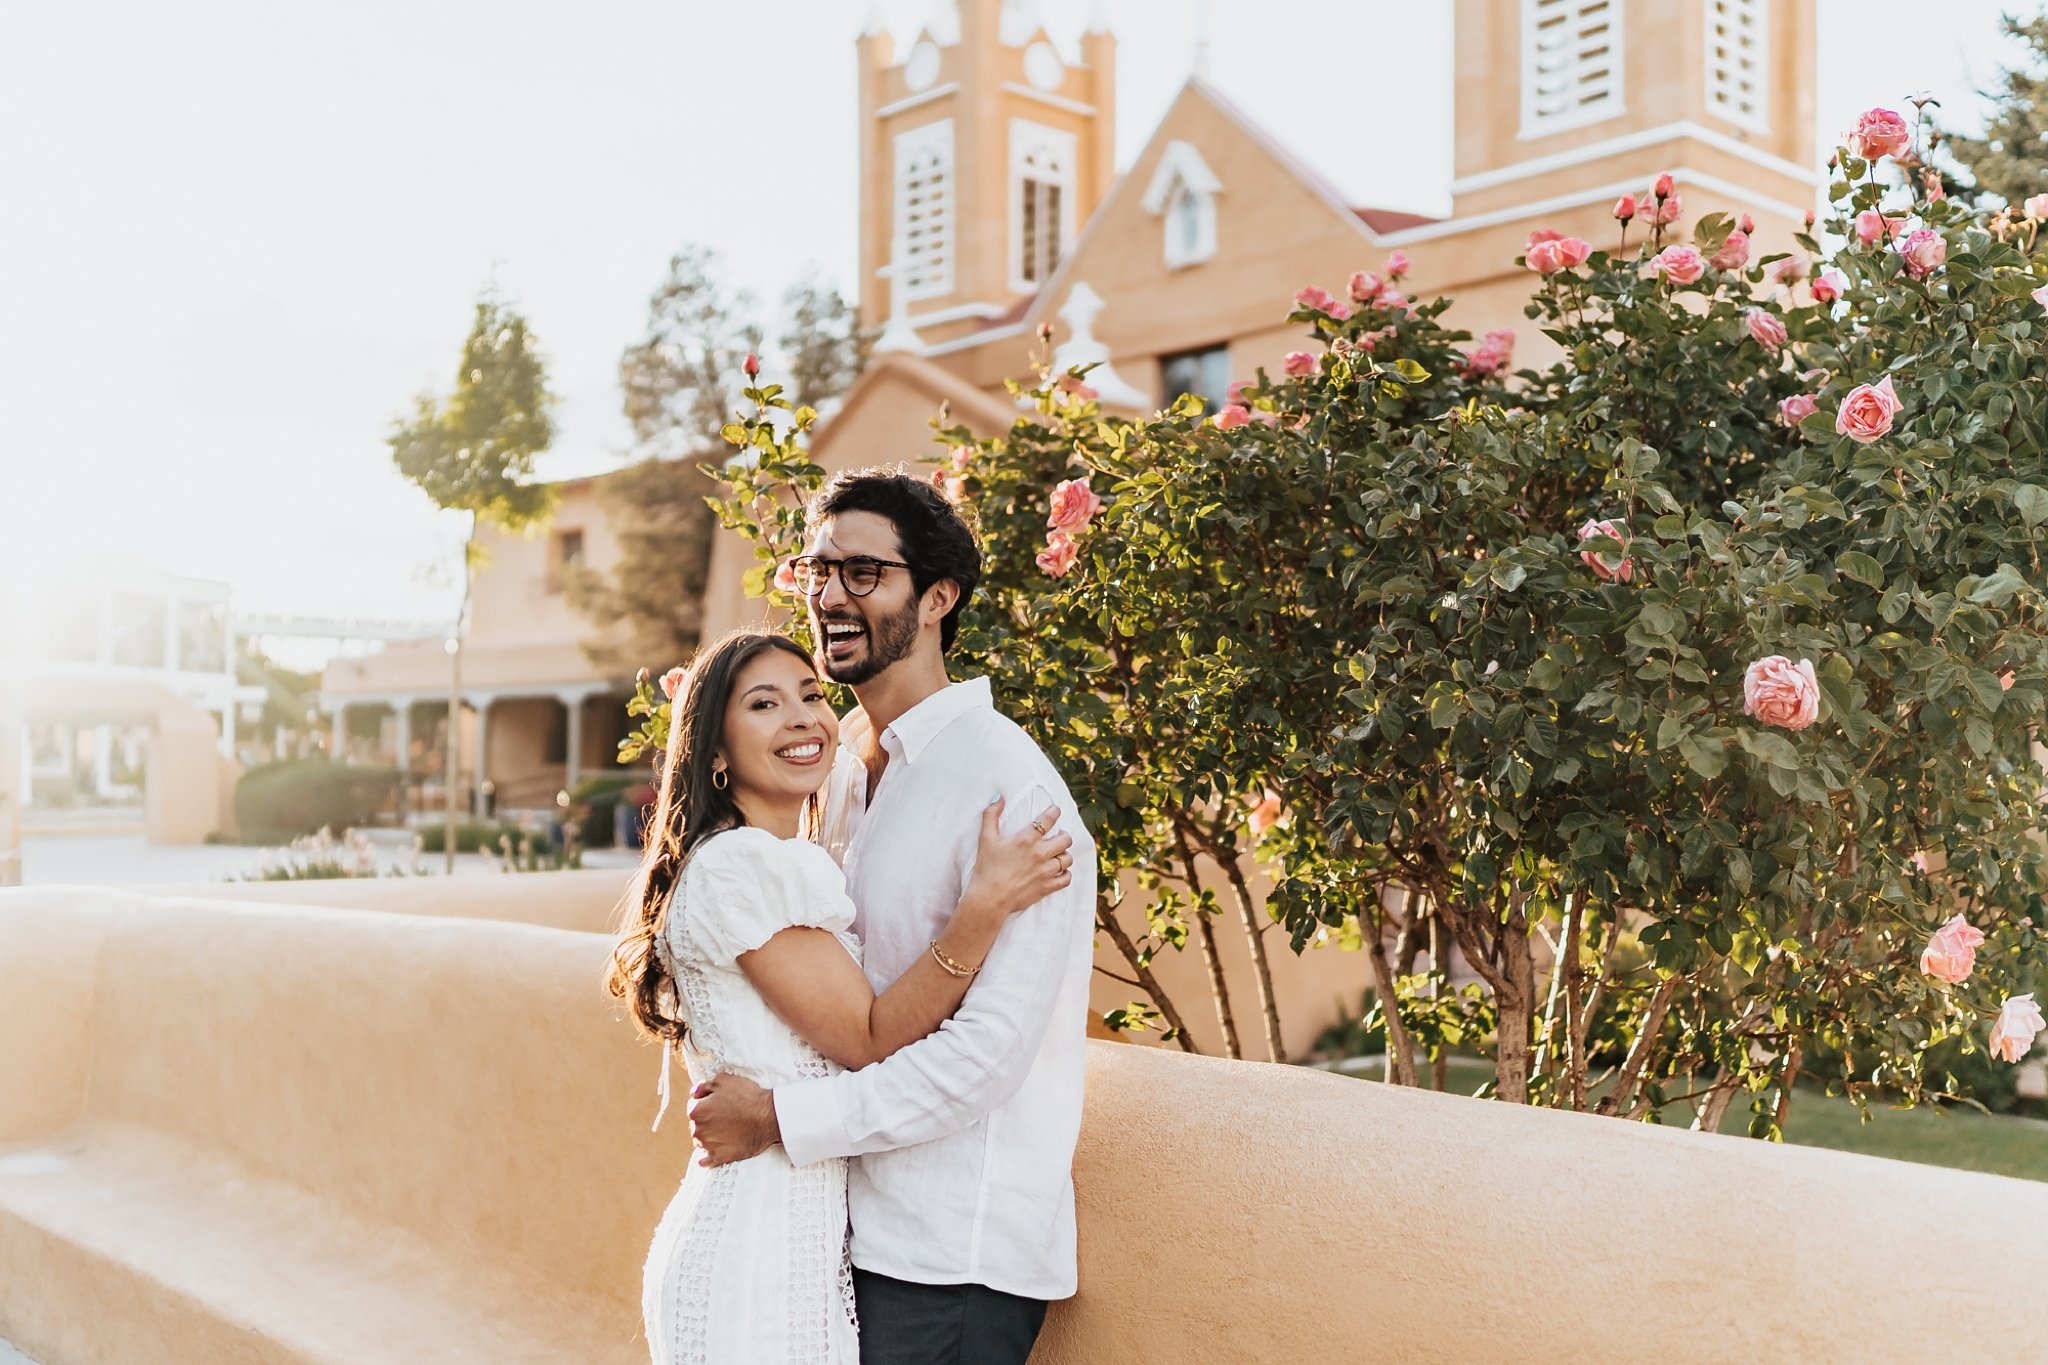 Alicia+lucia+photography+-+albuquerque+wedding+photographer+-+santa+fe+wedding+photography+-+new+mexico+wedding+photographer+-+new+mexico+wedding+-+old+town+engagement+-+old+town+wedding+-+southwest+engagement_0015.jpg